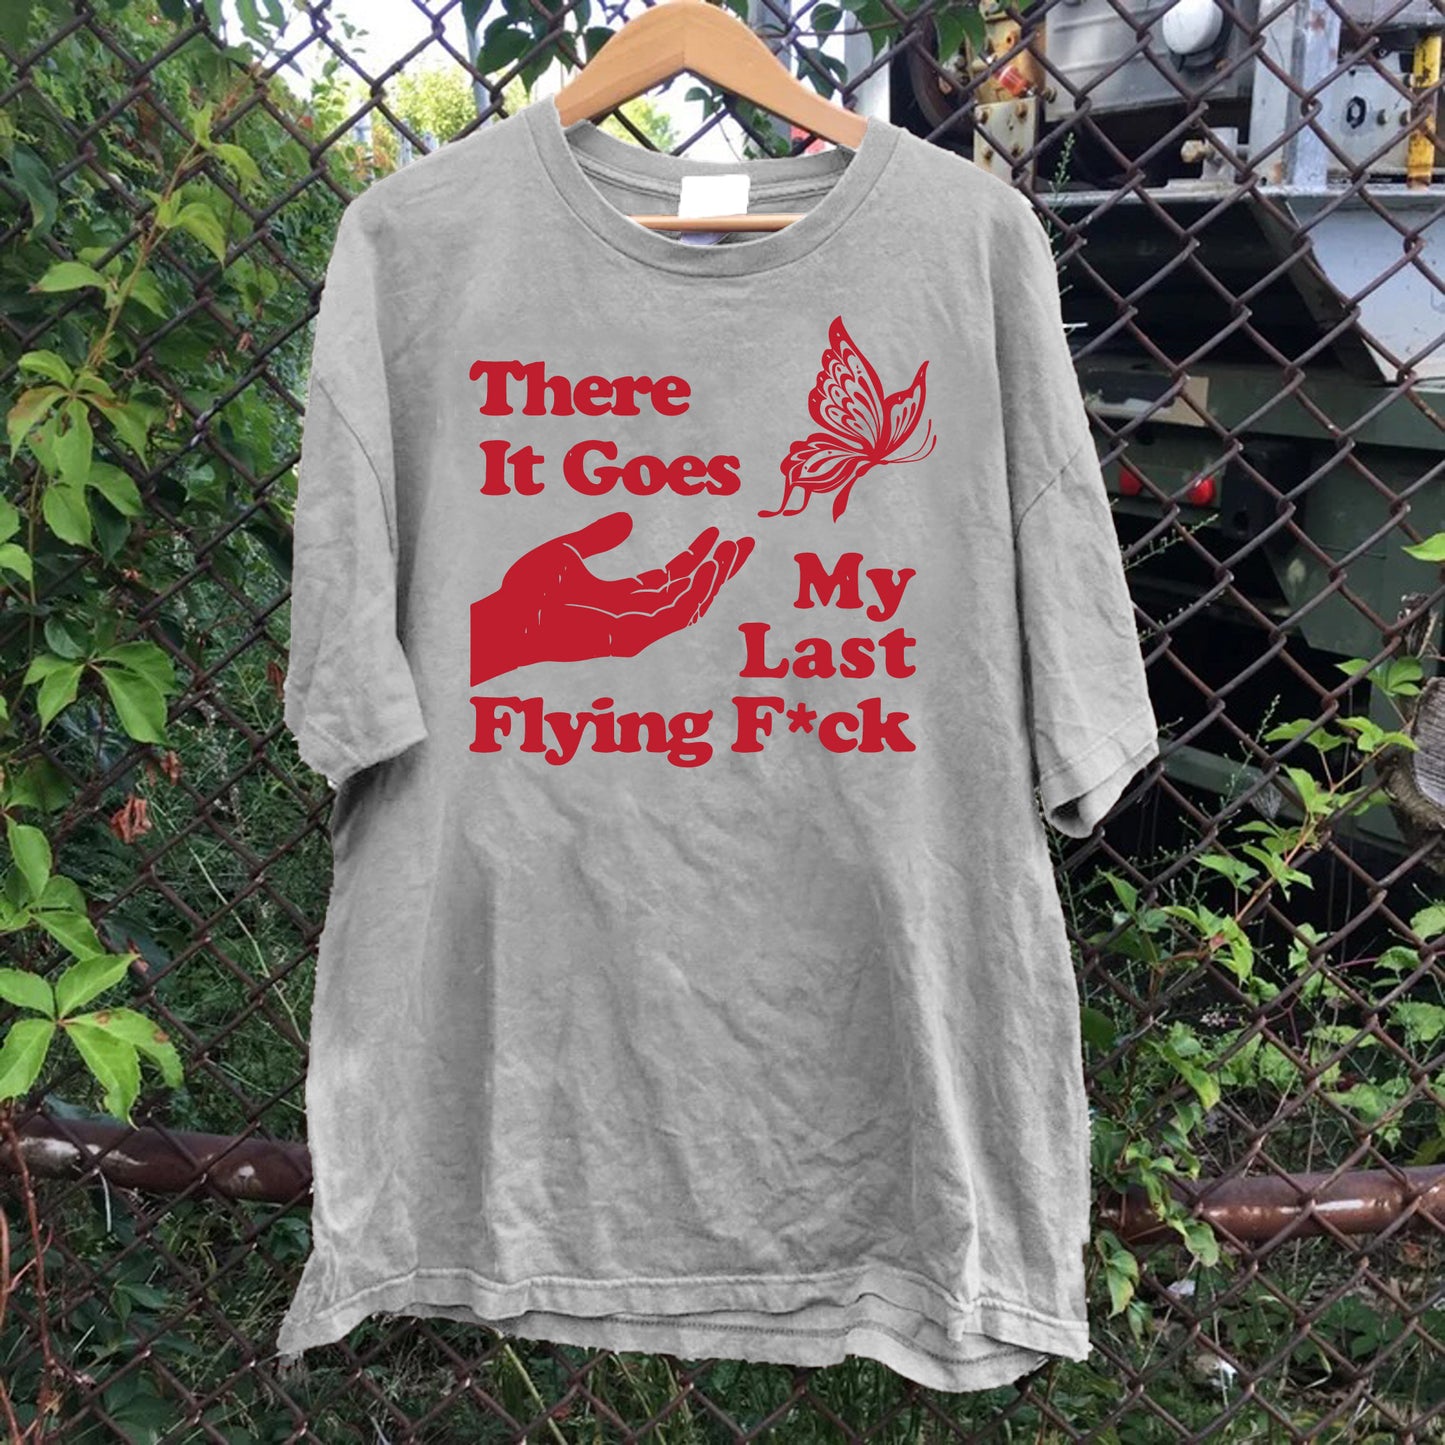 There Goes My Last Flying F*ck Butterfly Tee